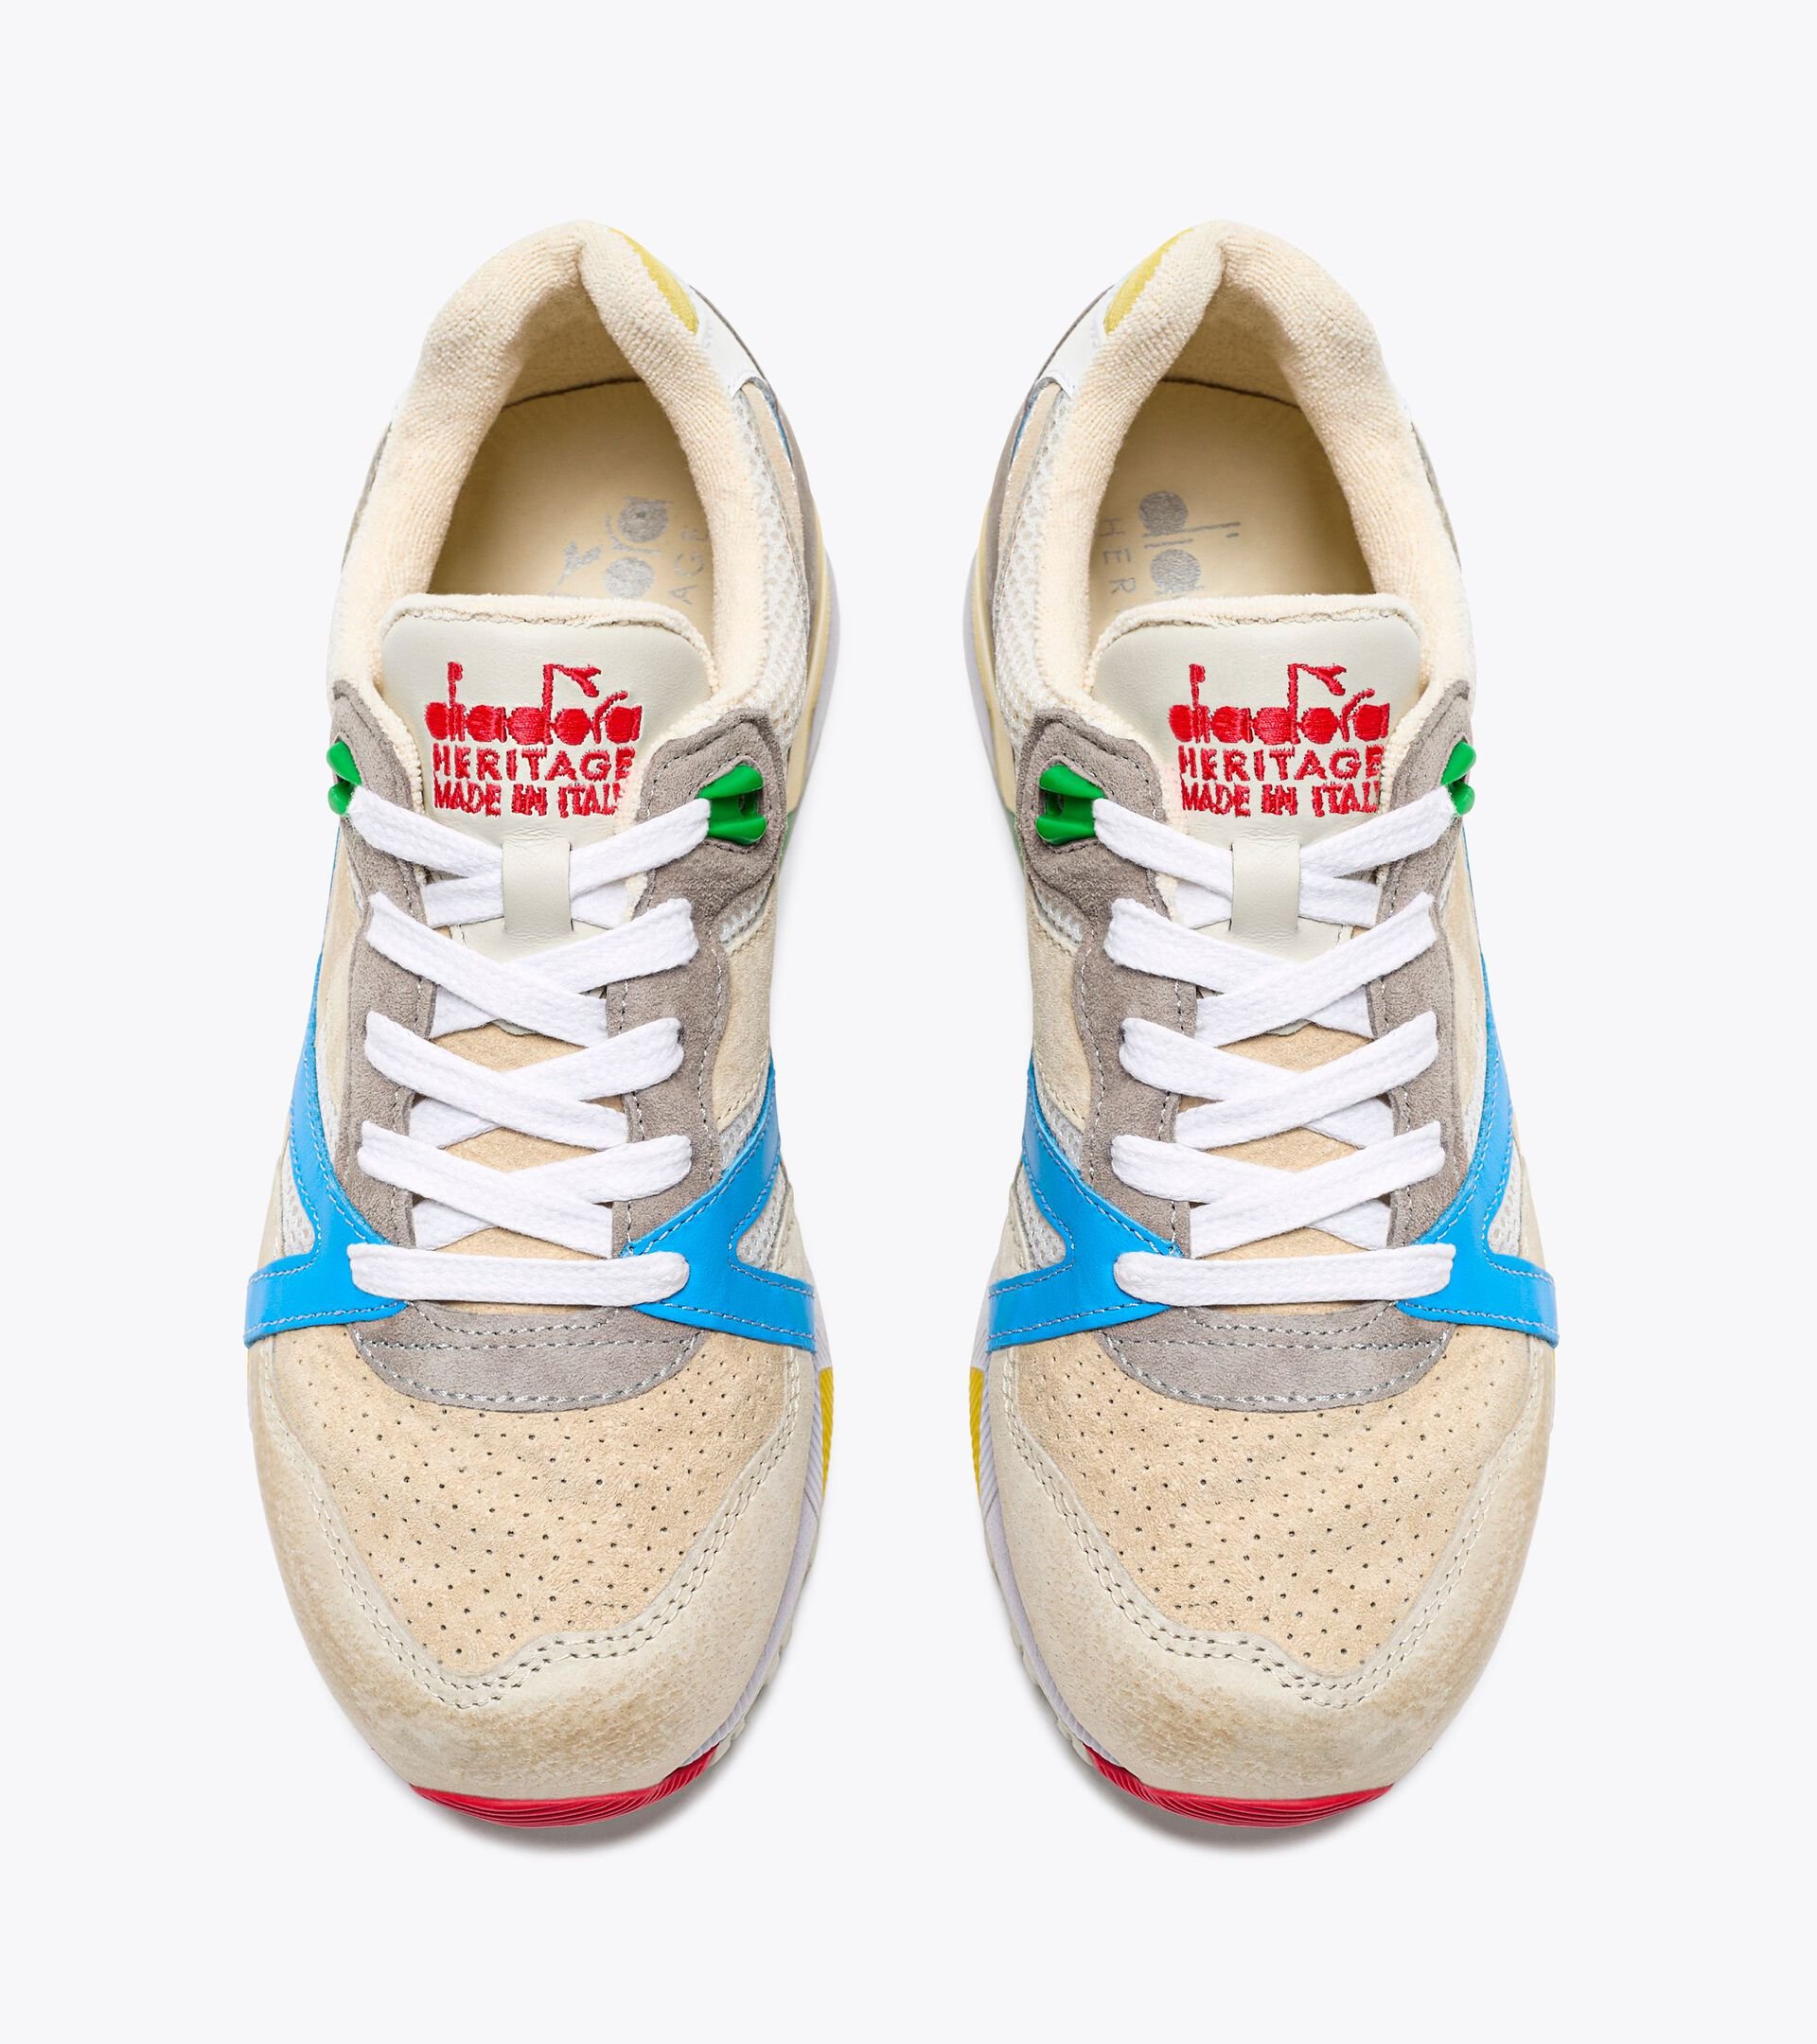 Sneaker Heritage - Made in Italy - genderneutral 
 N9000 PODIO ITALIA MARSHMALLOW WEISS - Diadora